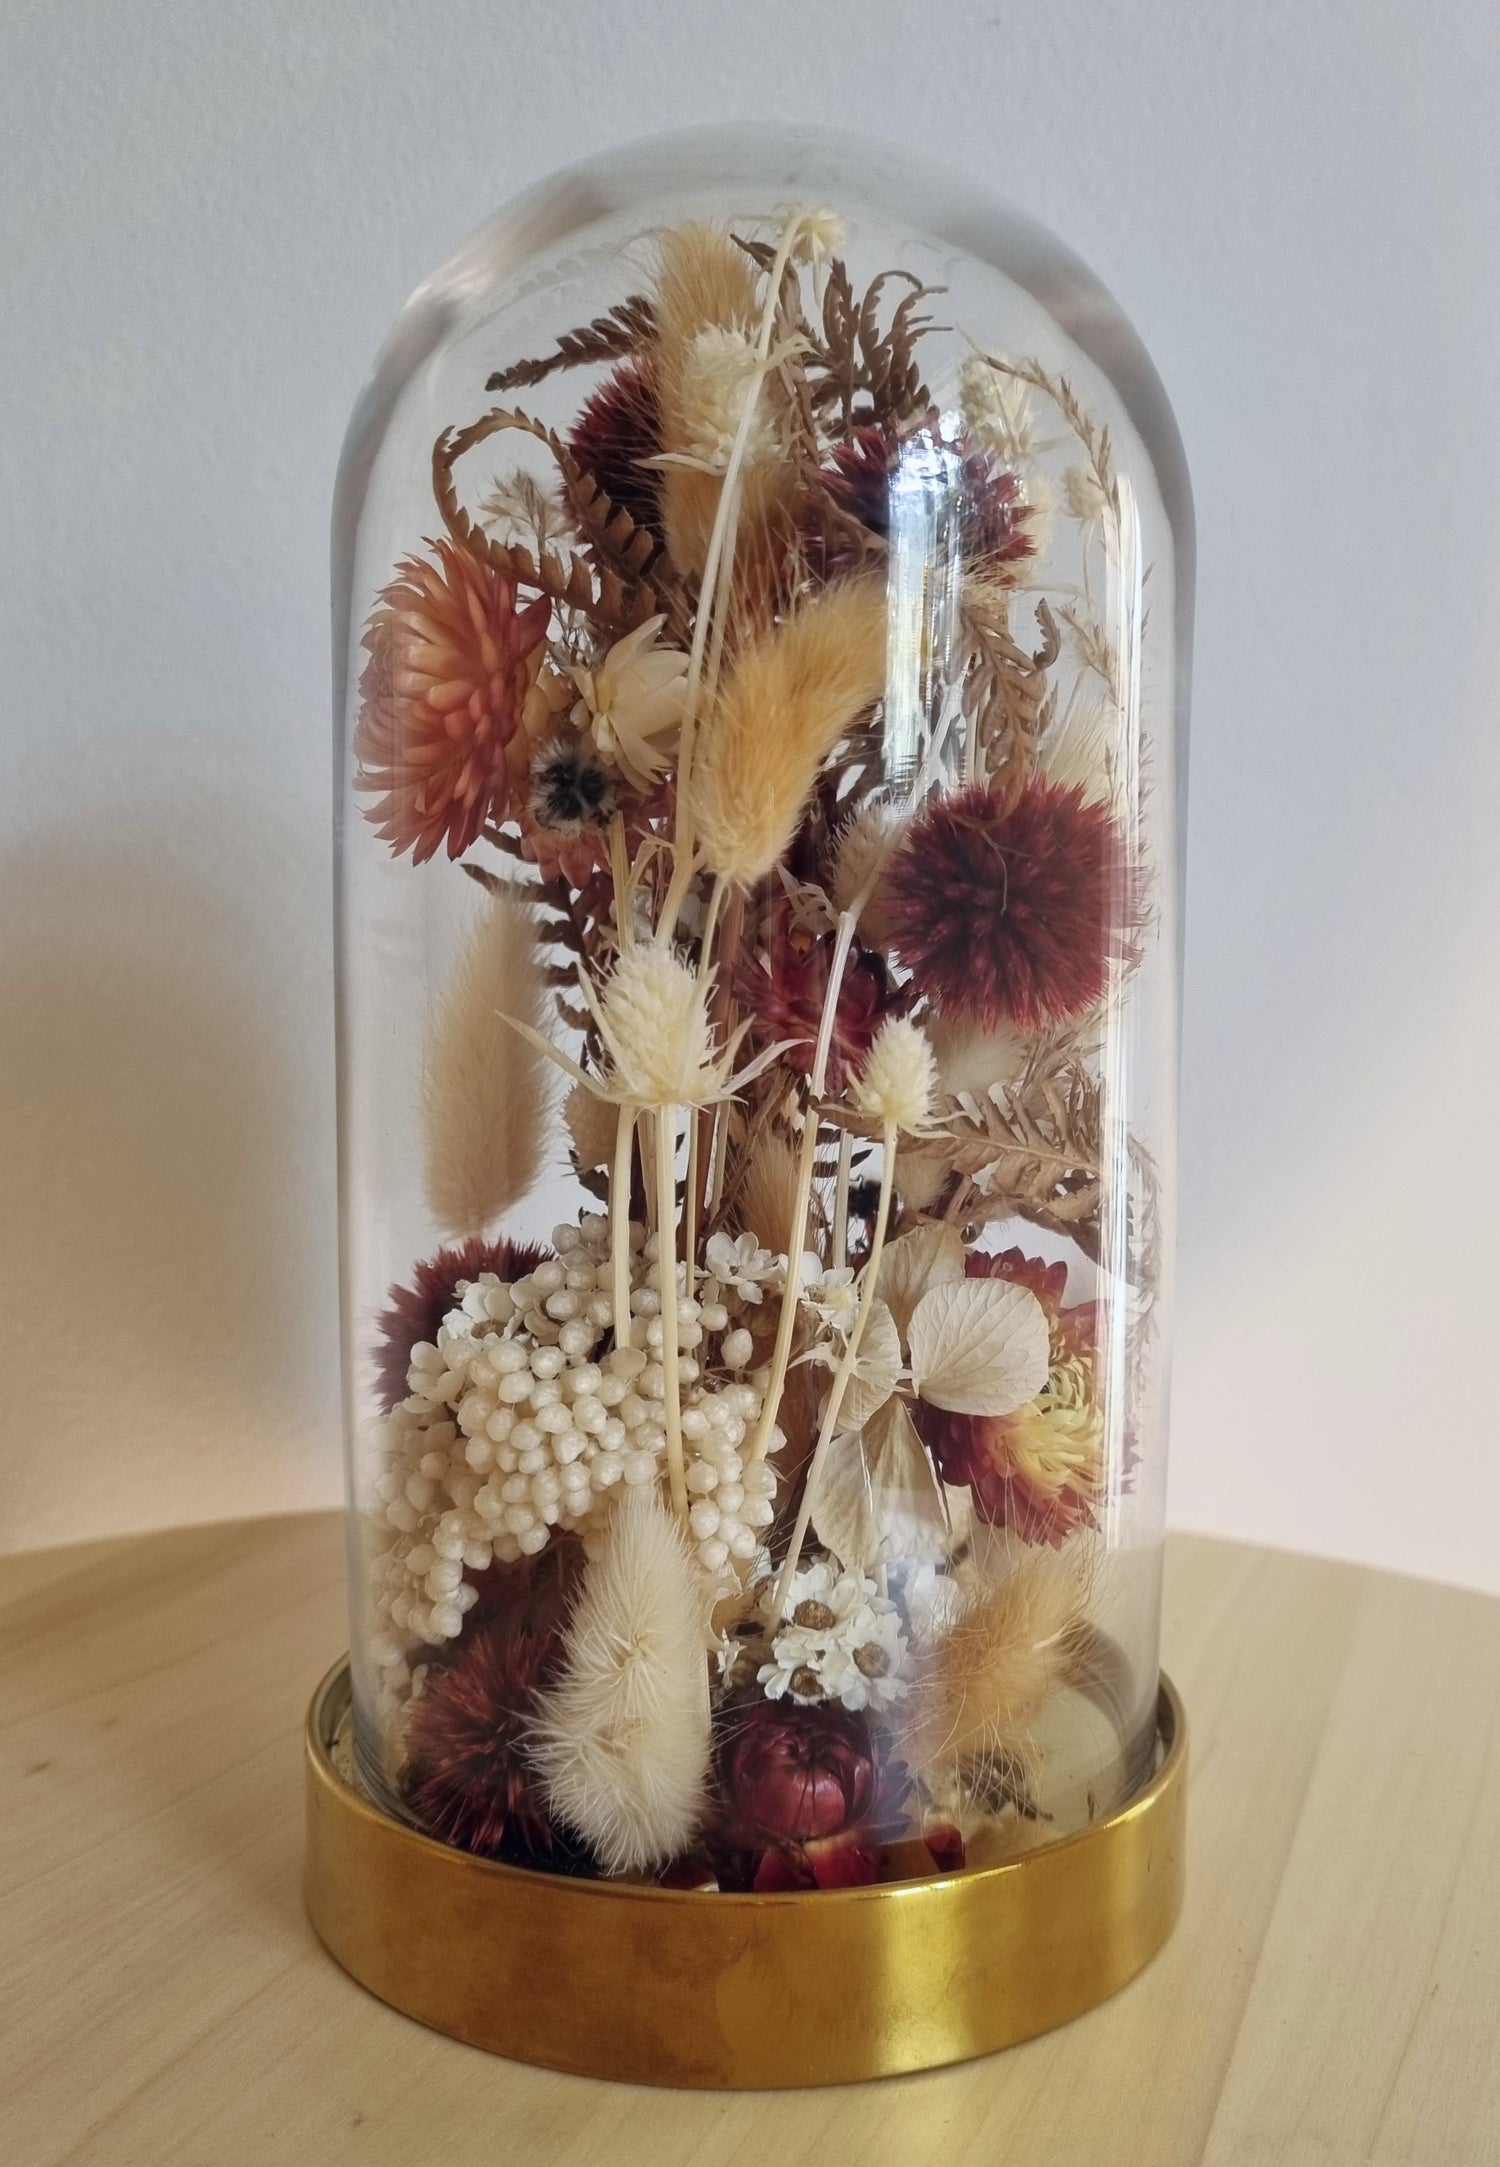 19cm glass dome with golden base features an abundance of dried wildflowers and foliages in deep reds, browns and ivory. 